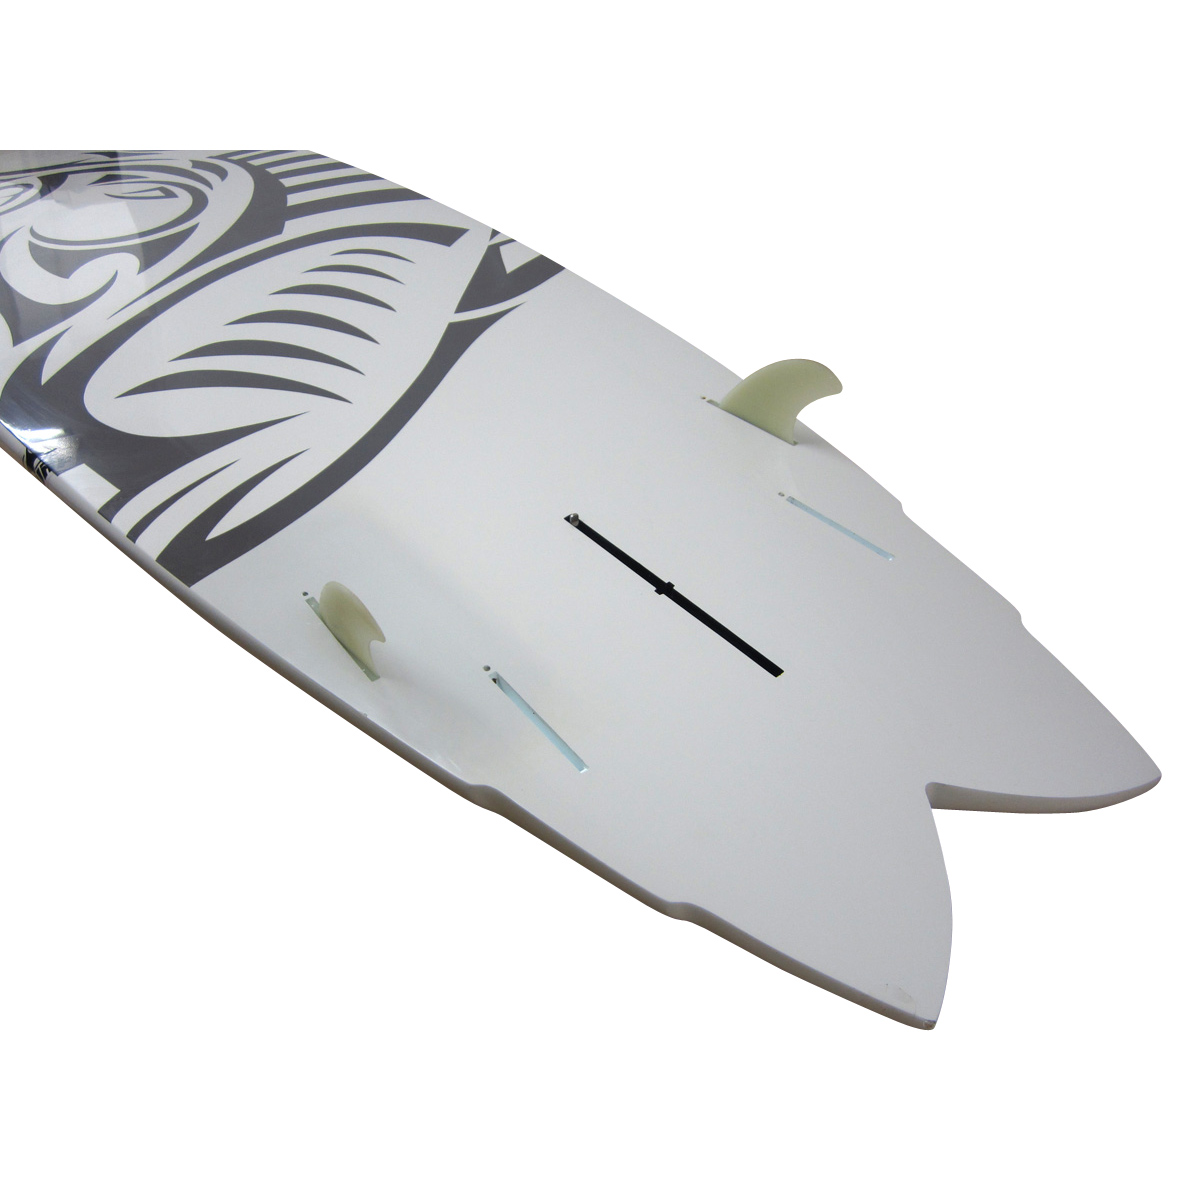 Tropical Blends / 10`6 Stand Up Paddle 